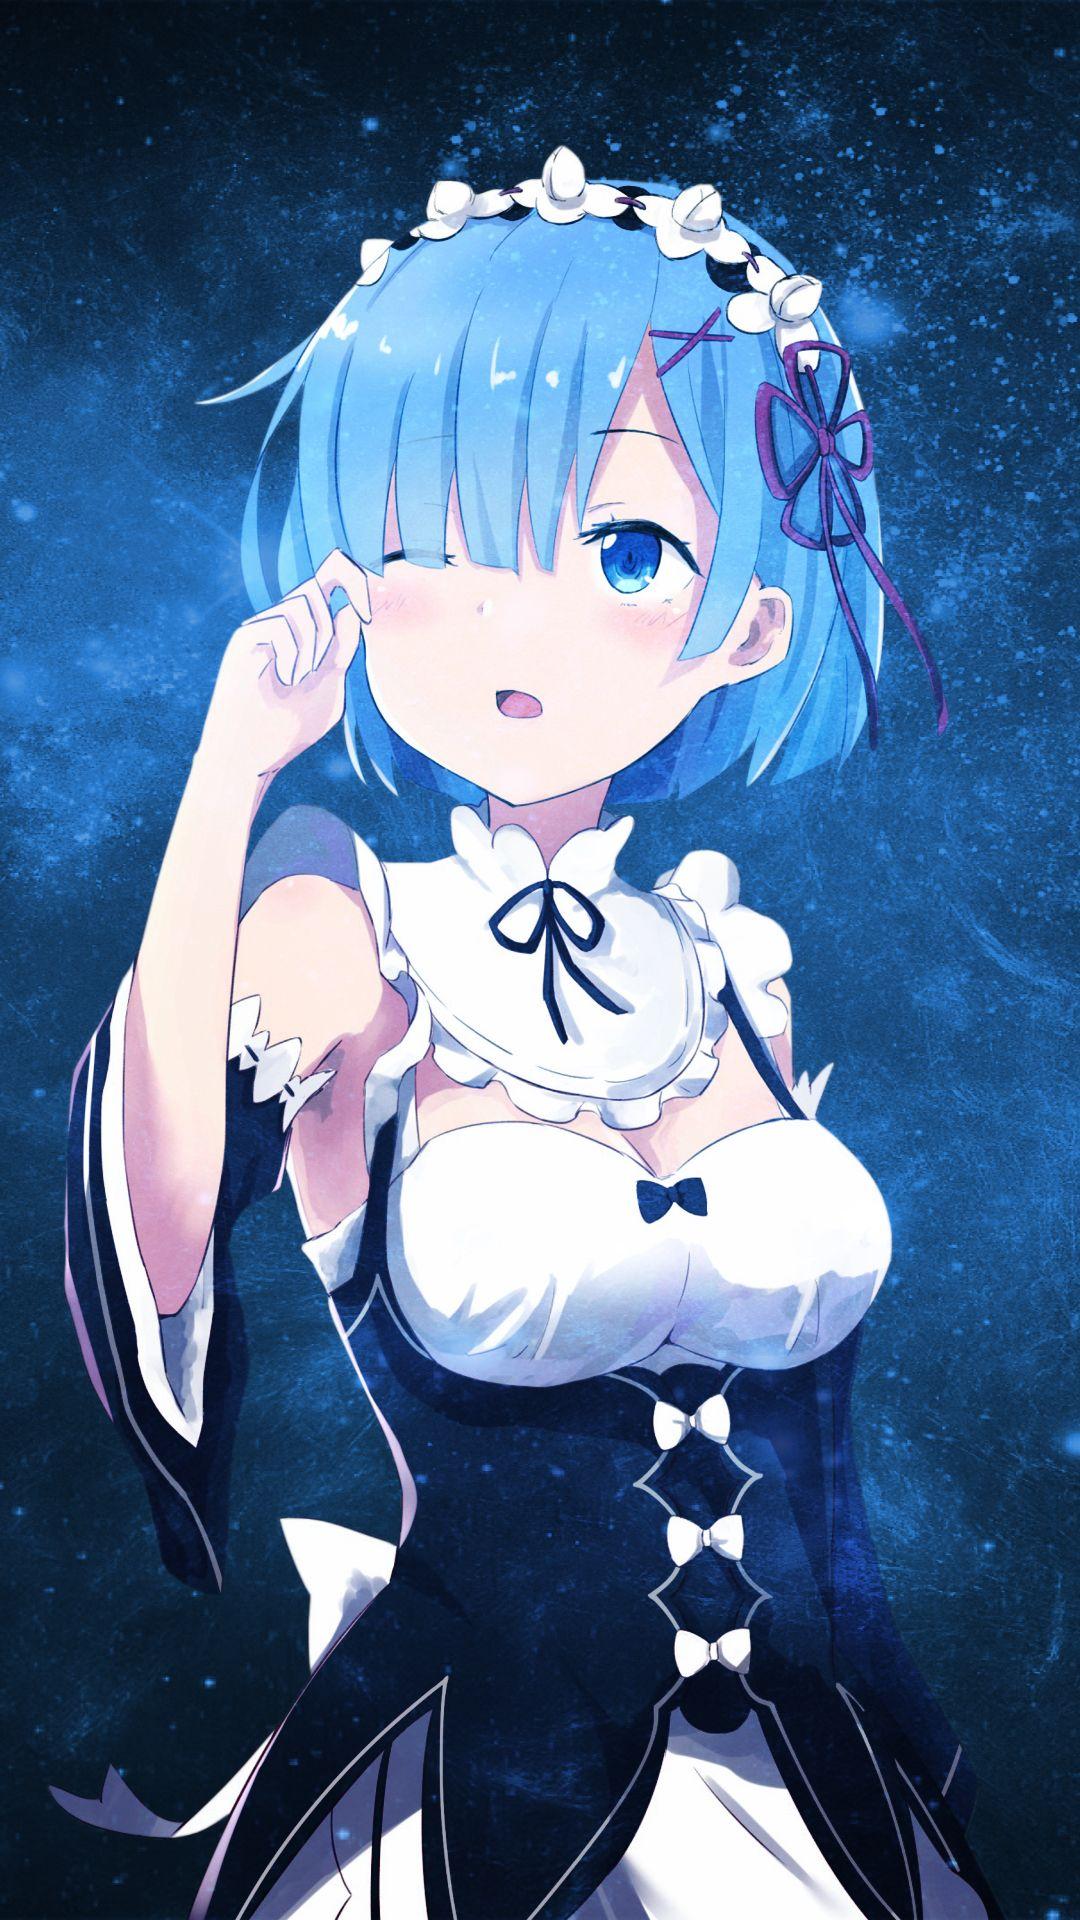 Rem Anime Cute Wallpapers Wallpaper Cave